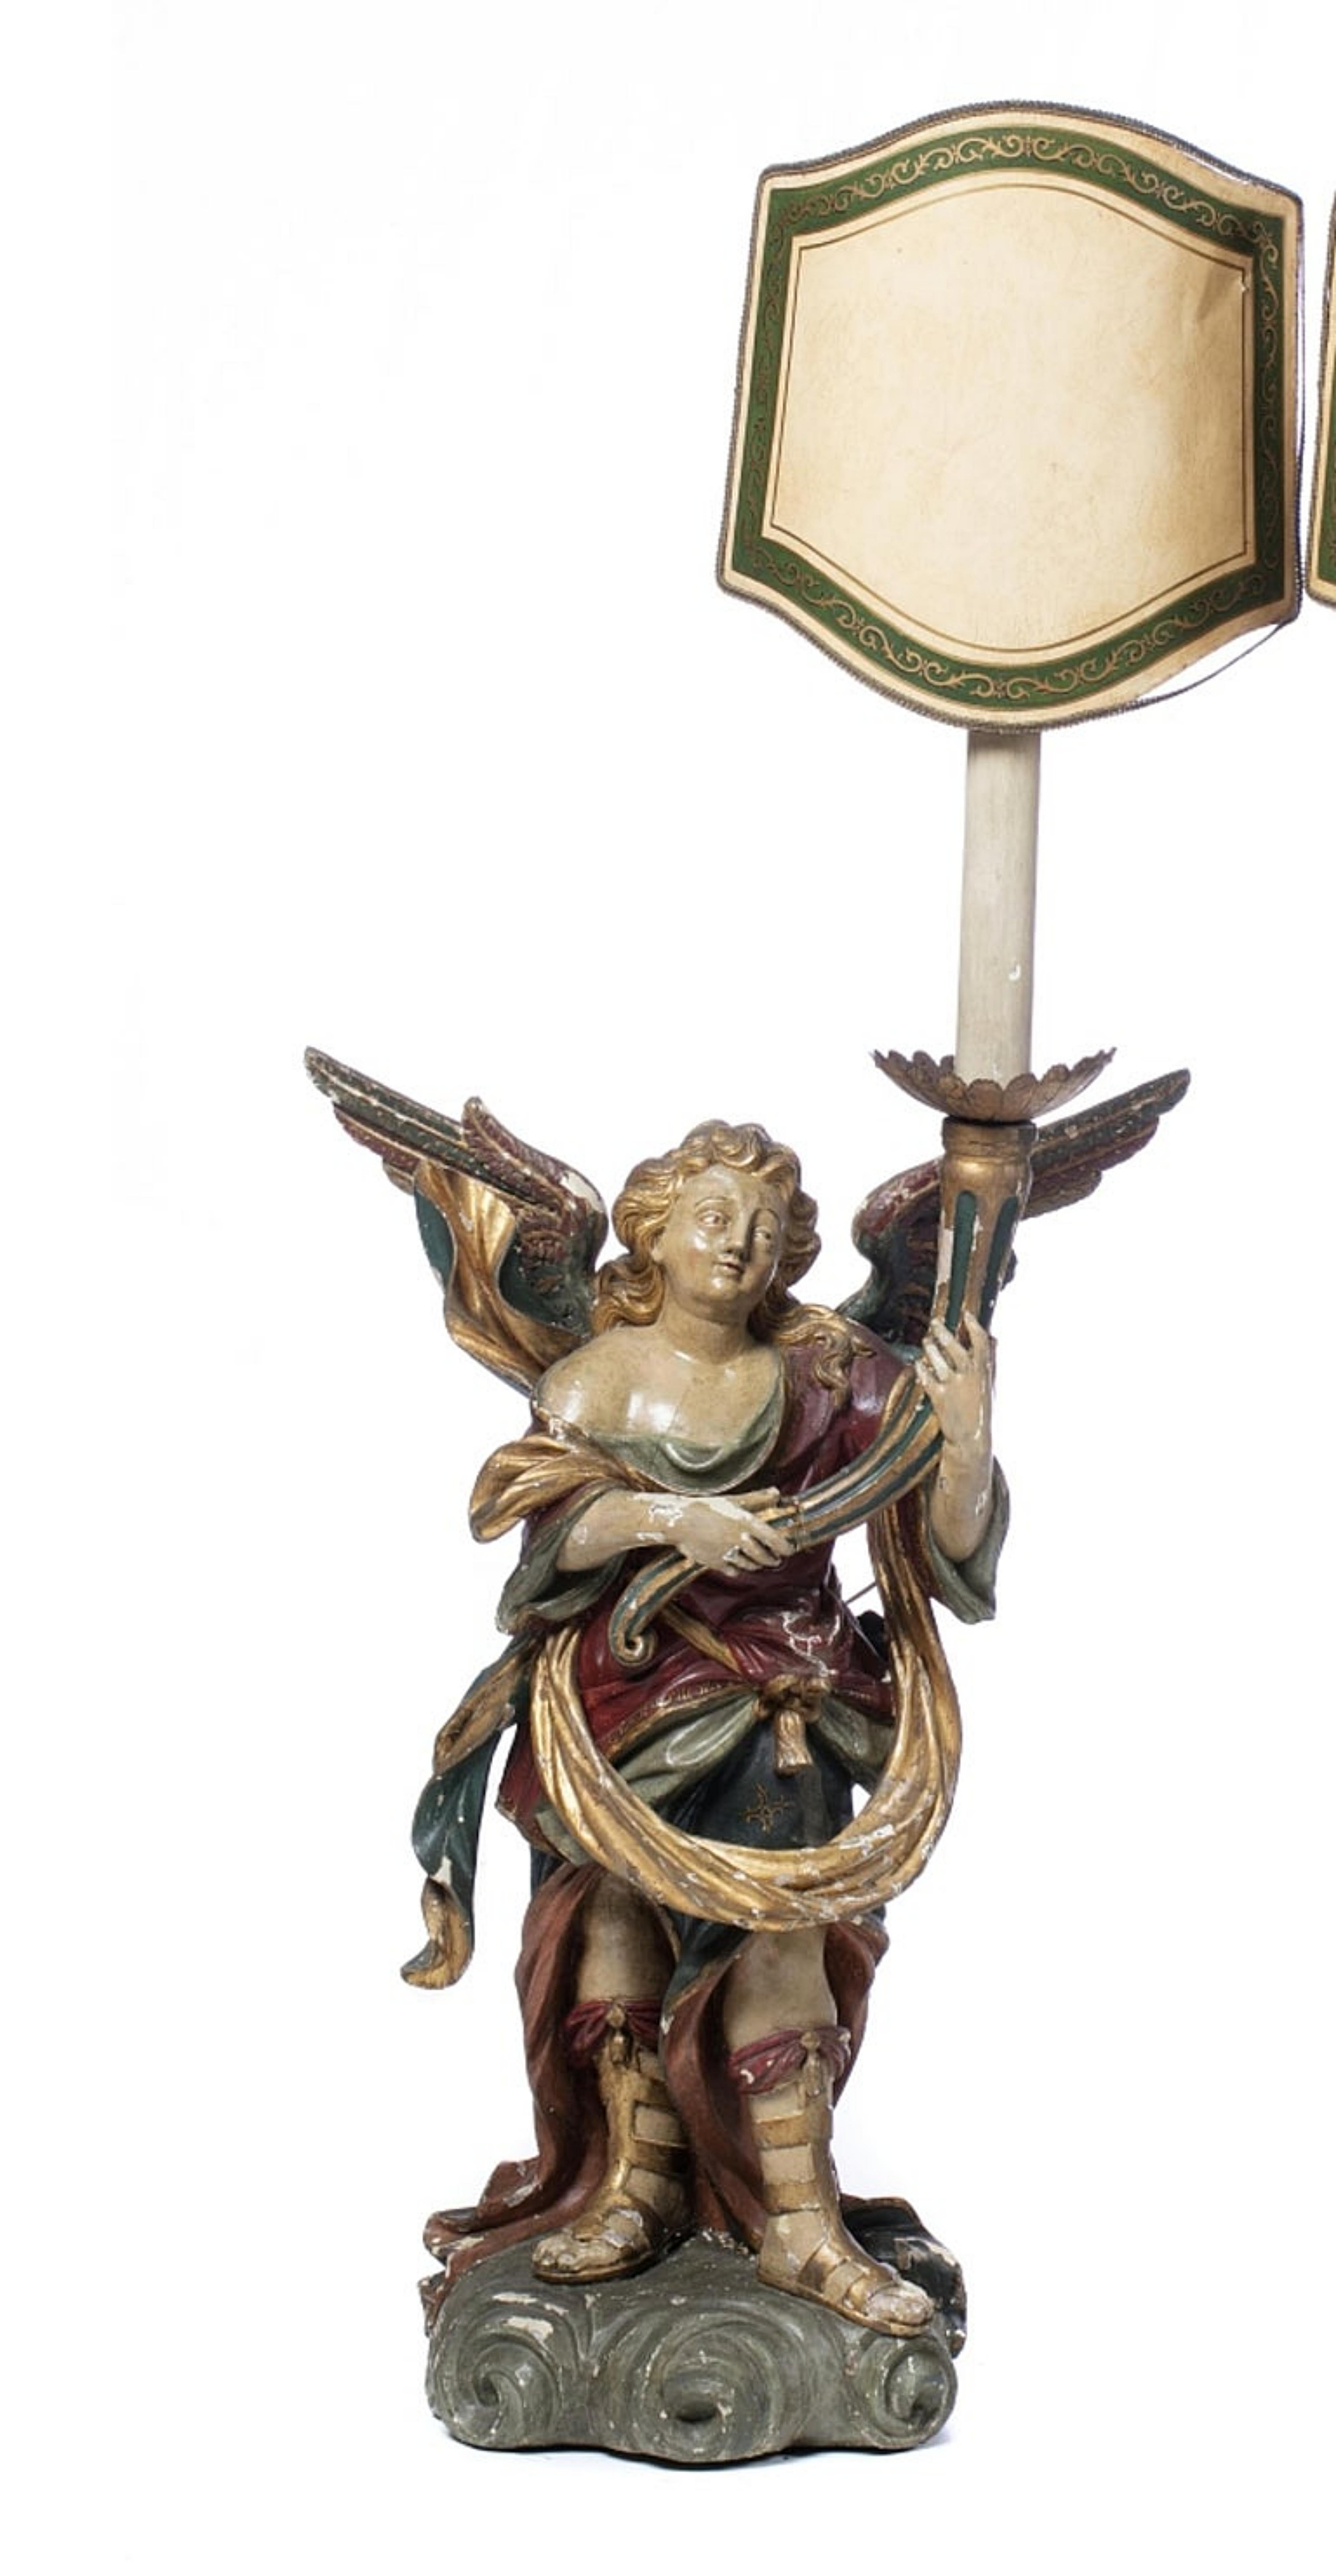 Pair of Portuguese Candeliary Seraphins

19th century 
in polychrome and gilded wood. 
The figures are represented standing, holding cornucopias. 
Adapted to lamps. 
Little defects in polychromy. 
Measure: Height: (sculpture) 90 cm.
Good condition.